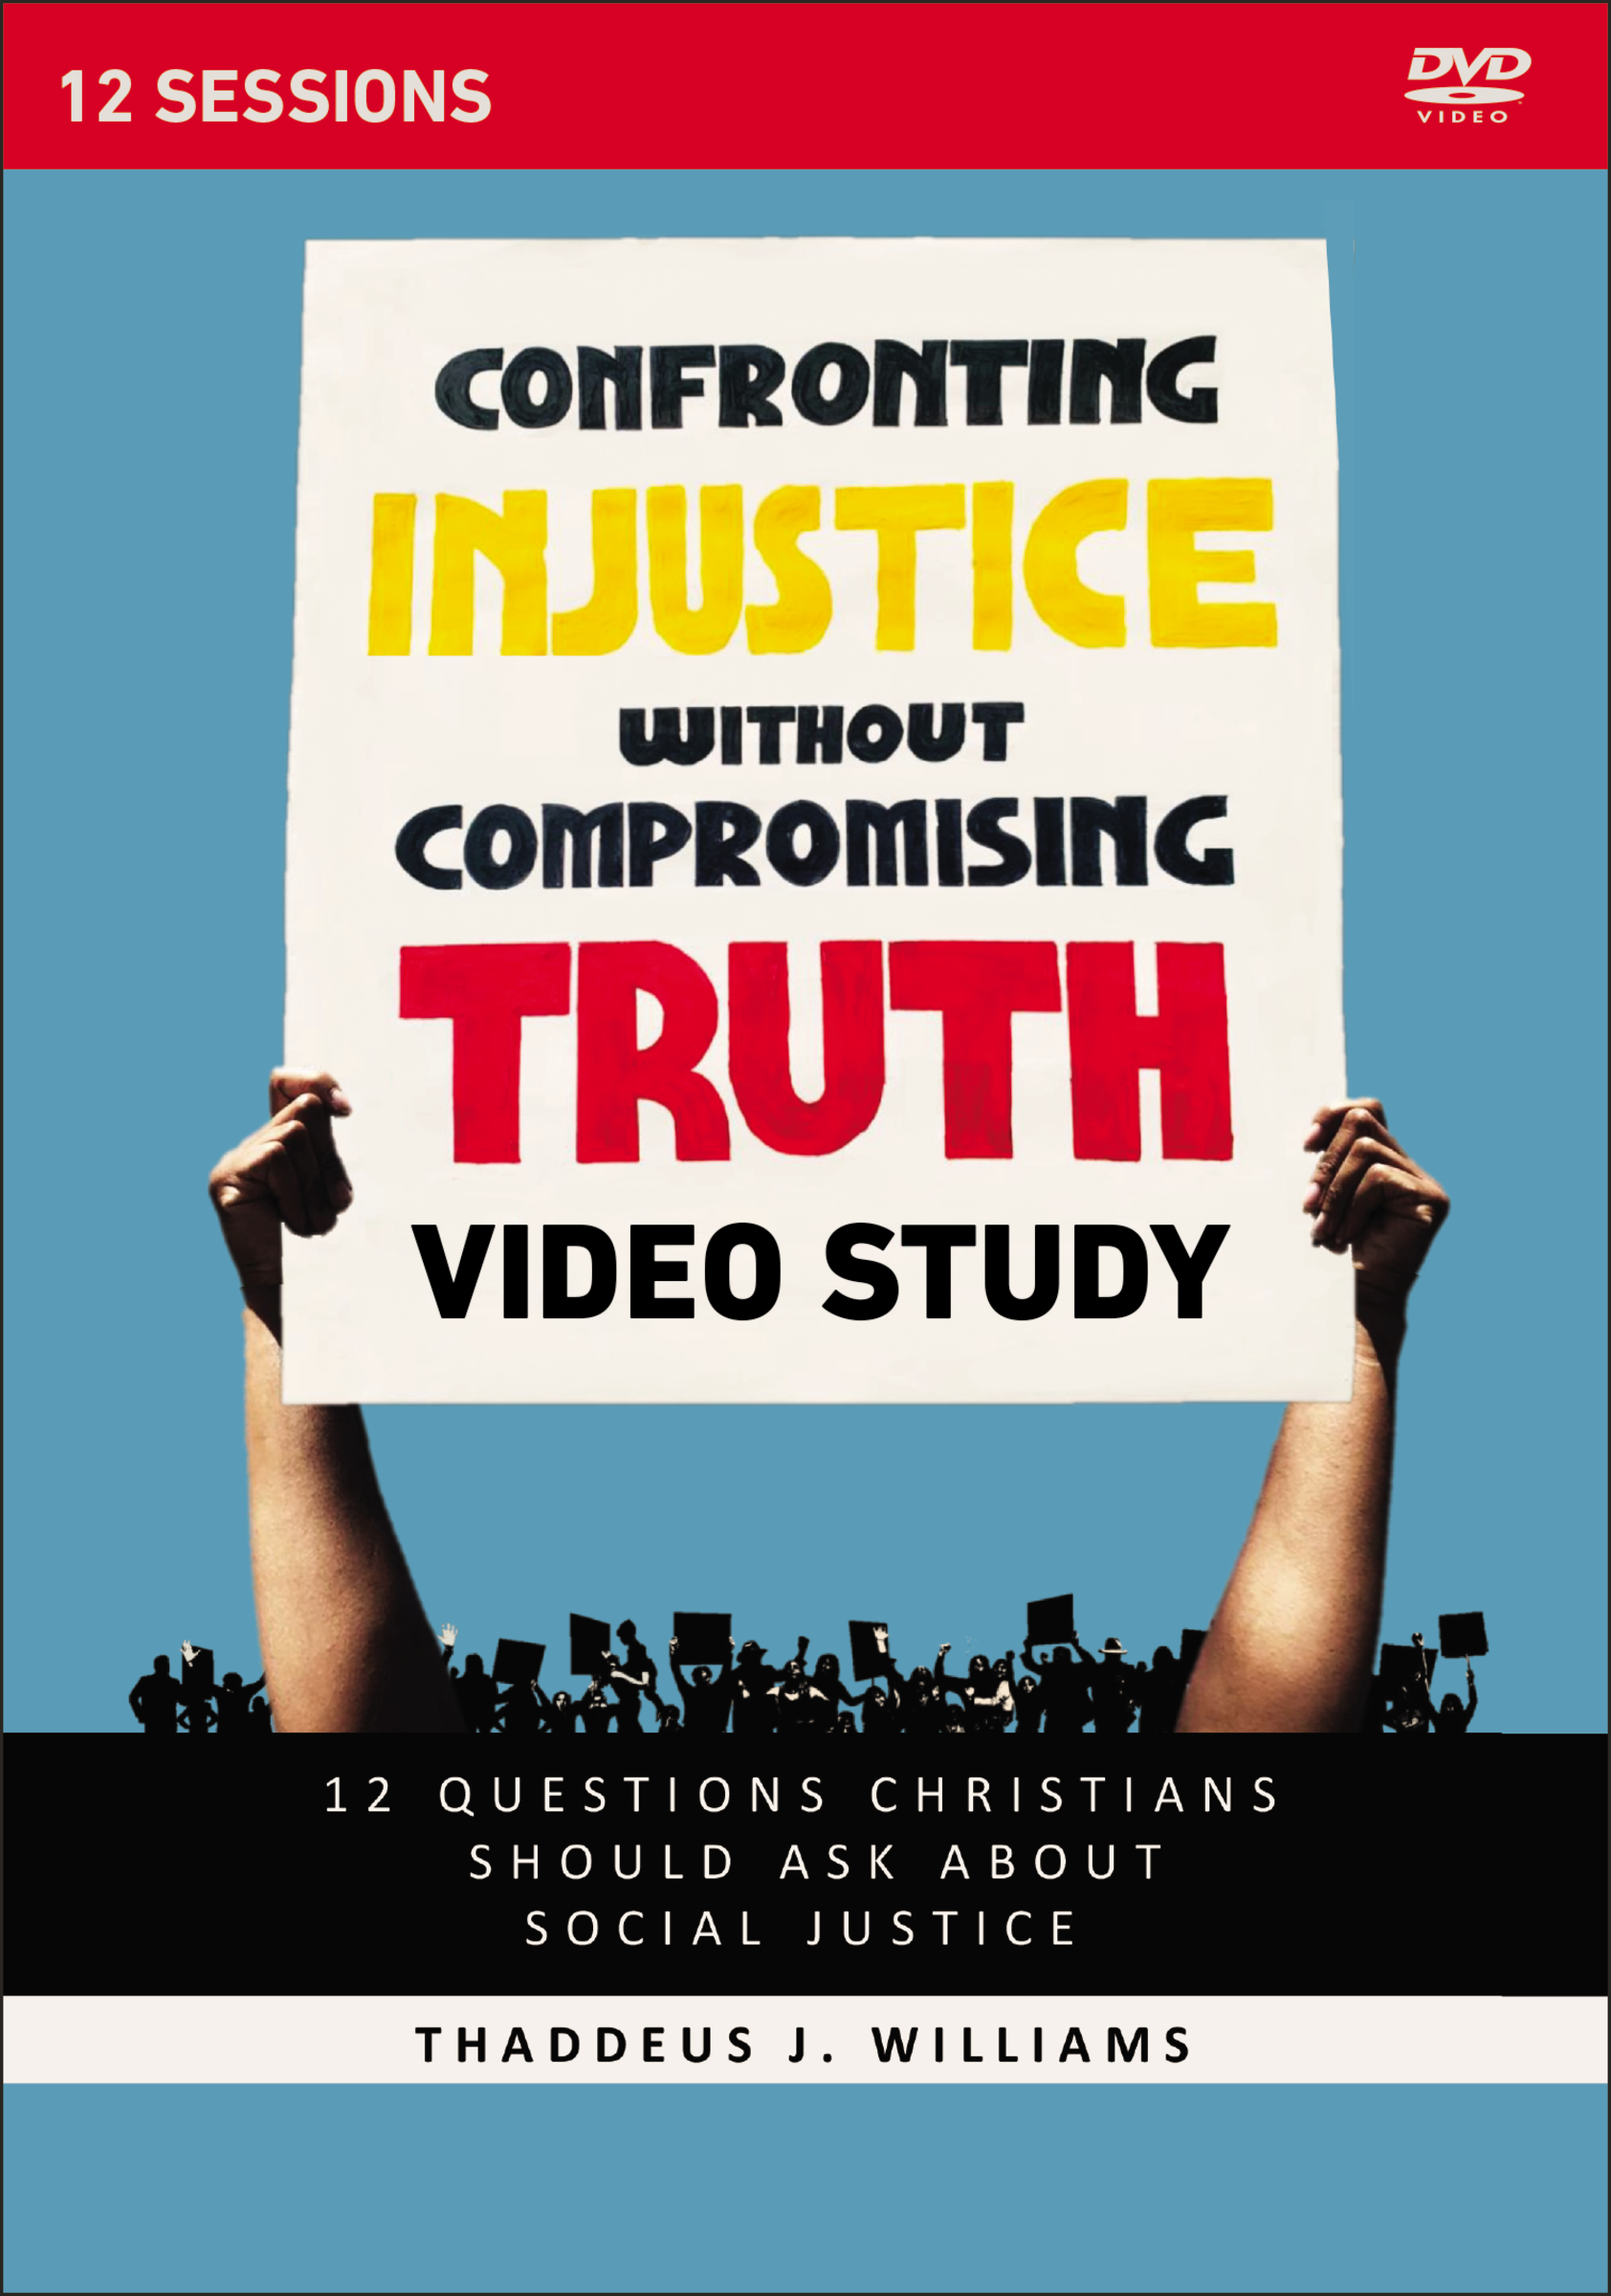 Confronting Injustice without Compromising Truth Video Study